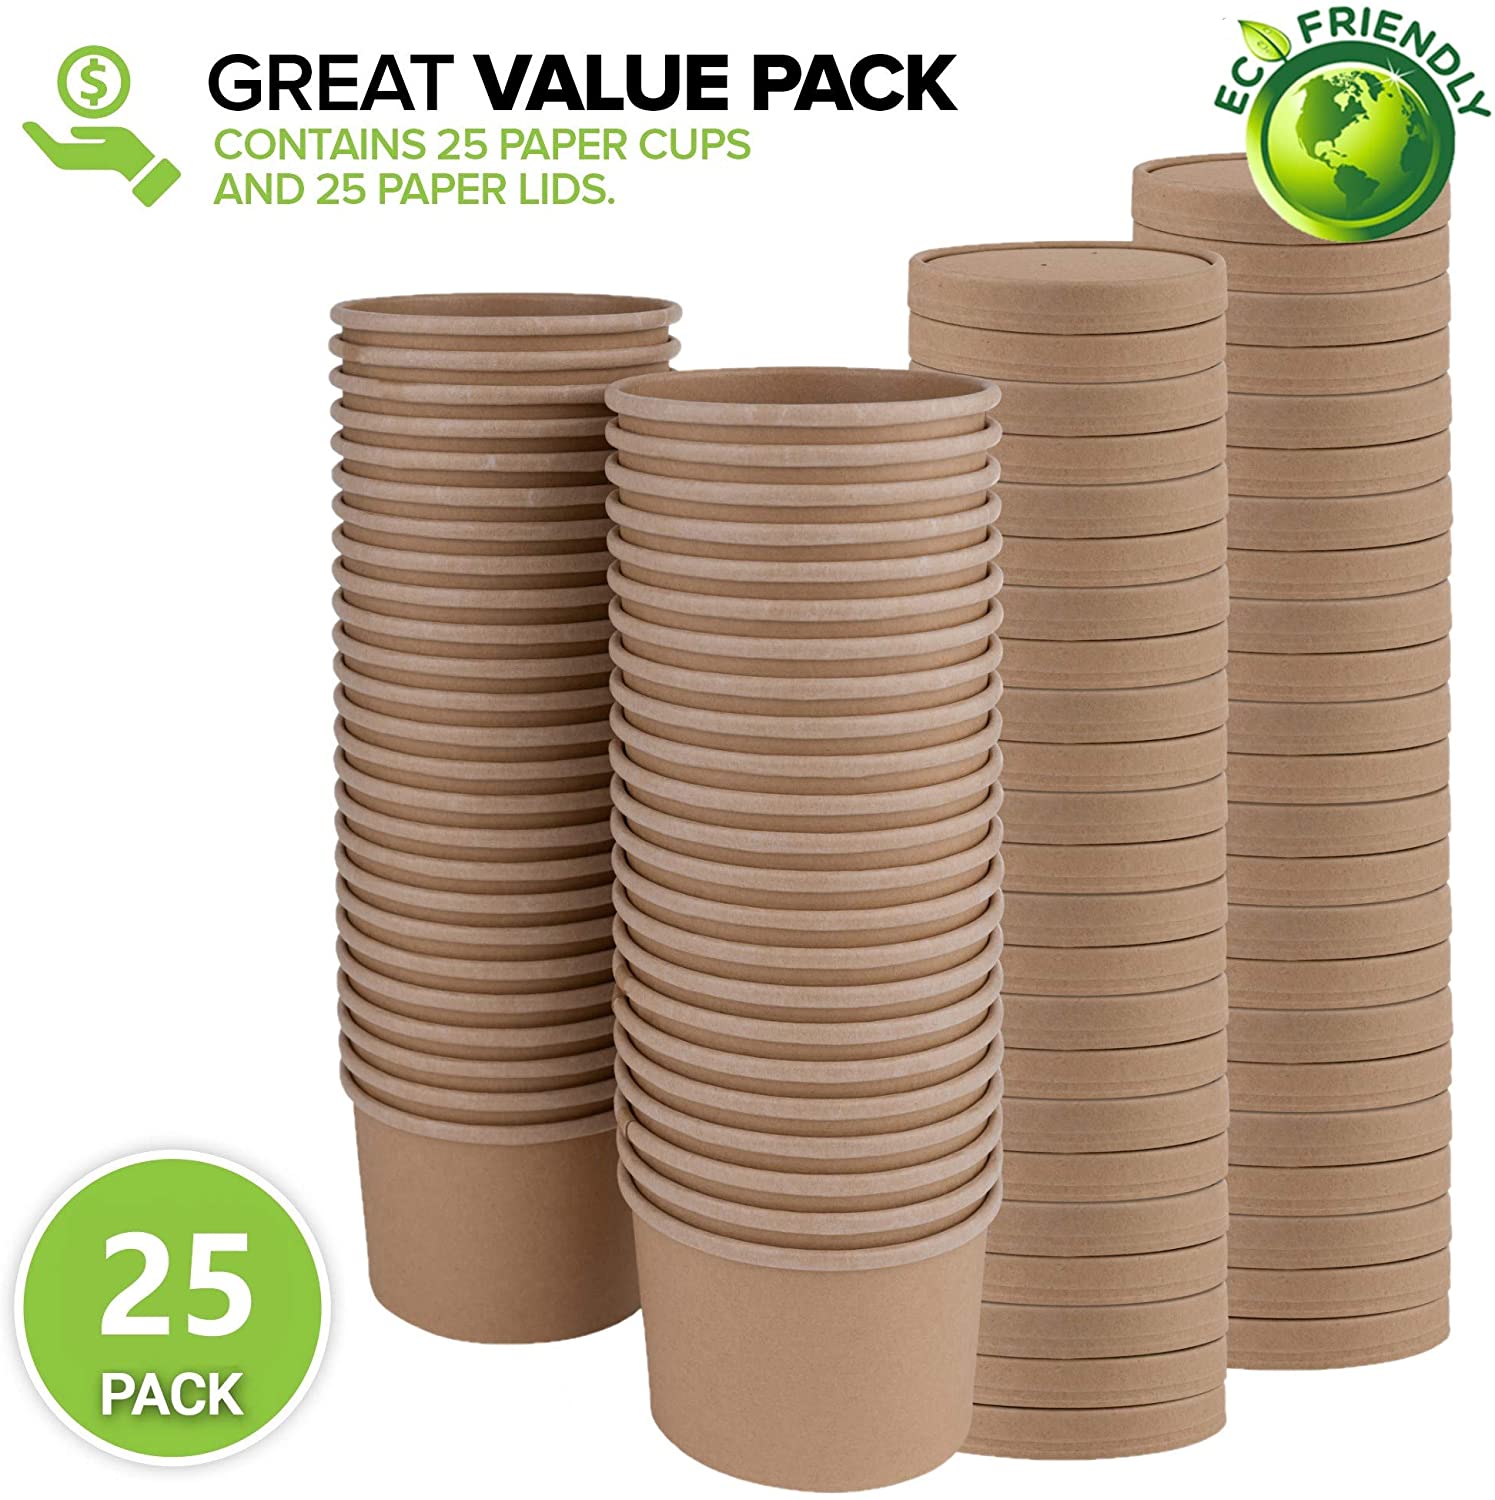 12 oz Kraft Brown Disposable Soup Cups with Lids - 25 Pack | eBay